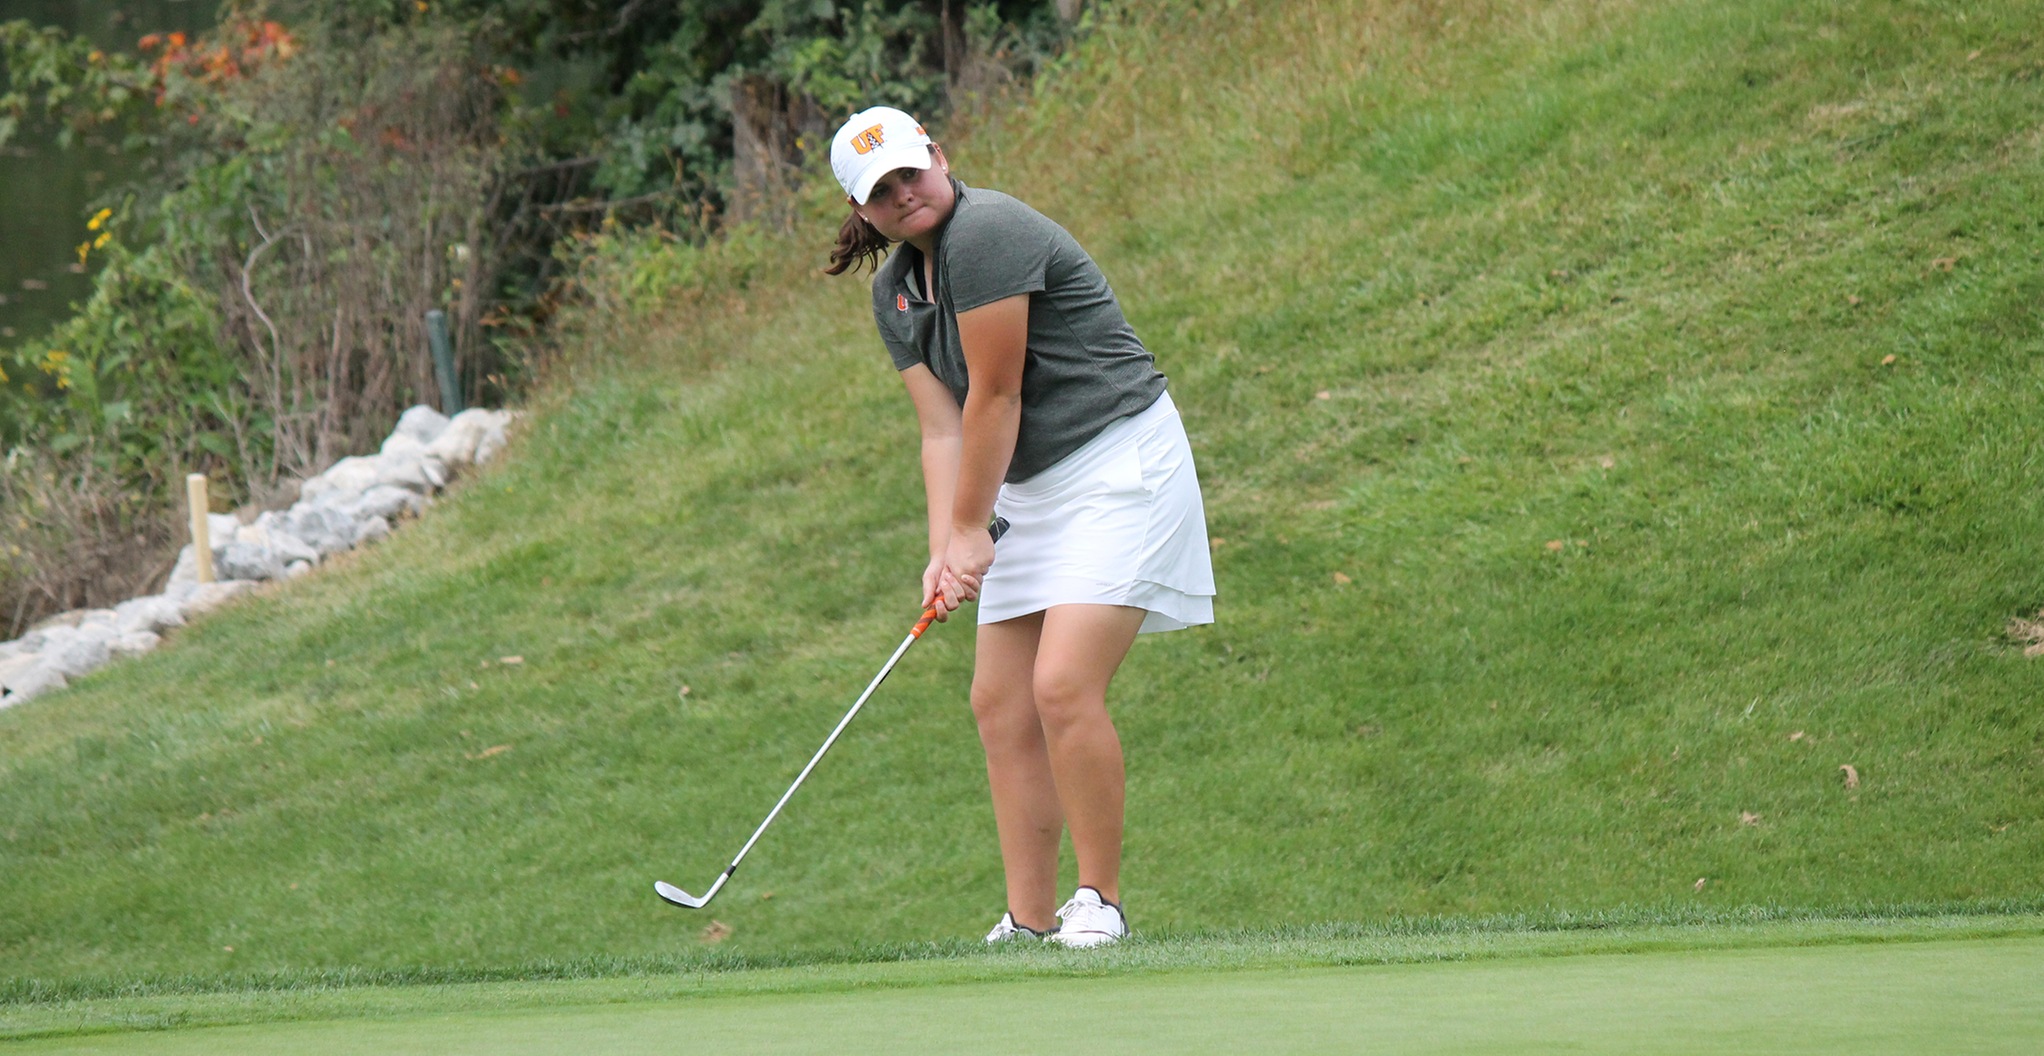 Wipper and Oilers Win Cav Classic